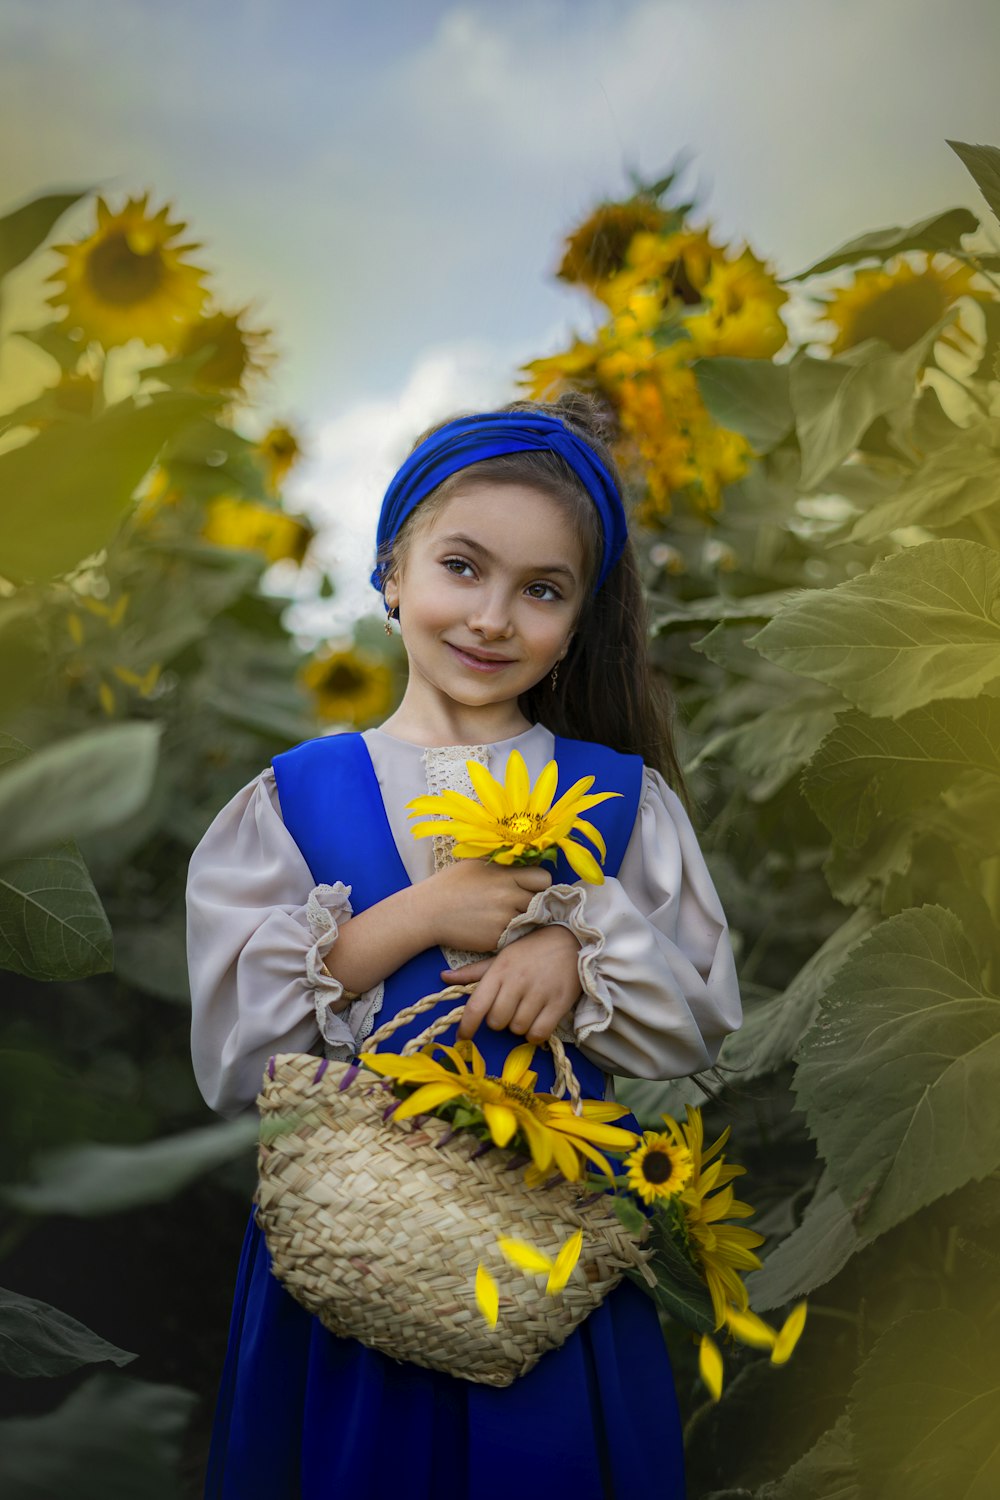 a young girl in a blue dress holding a basket of sunflowers